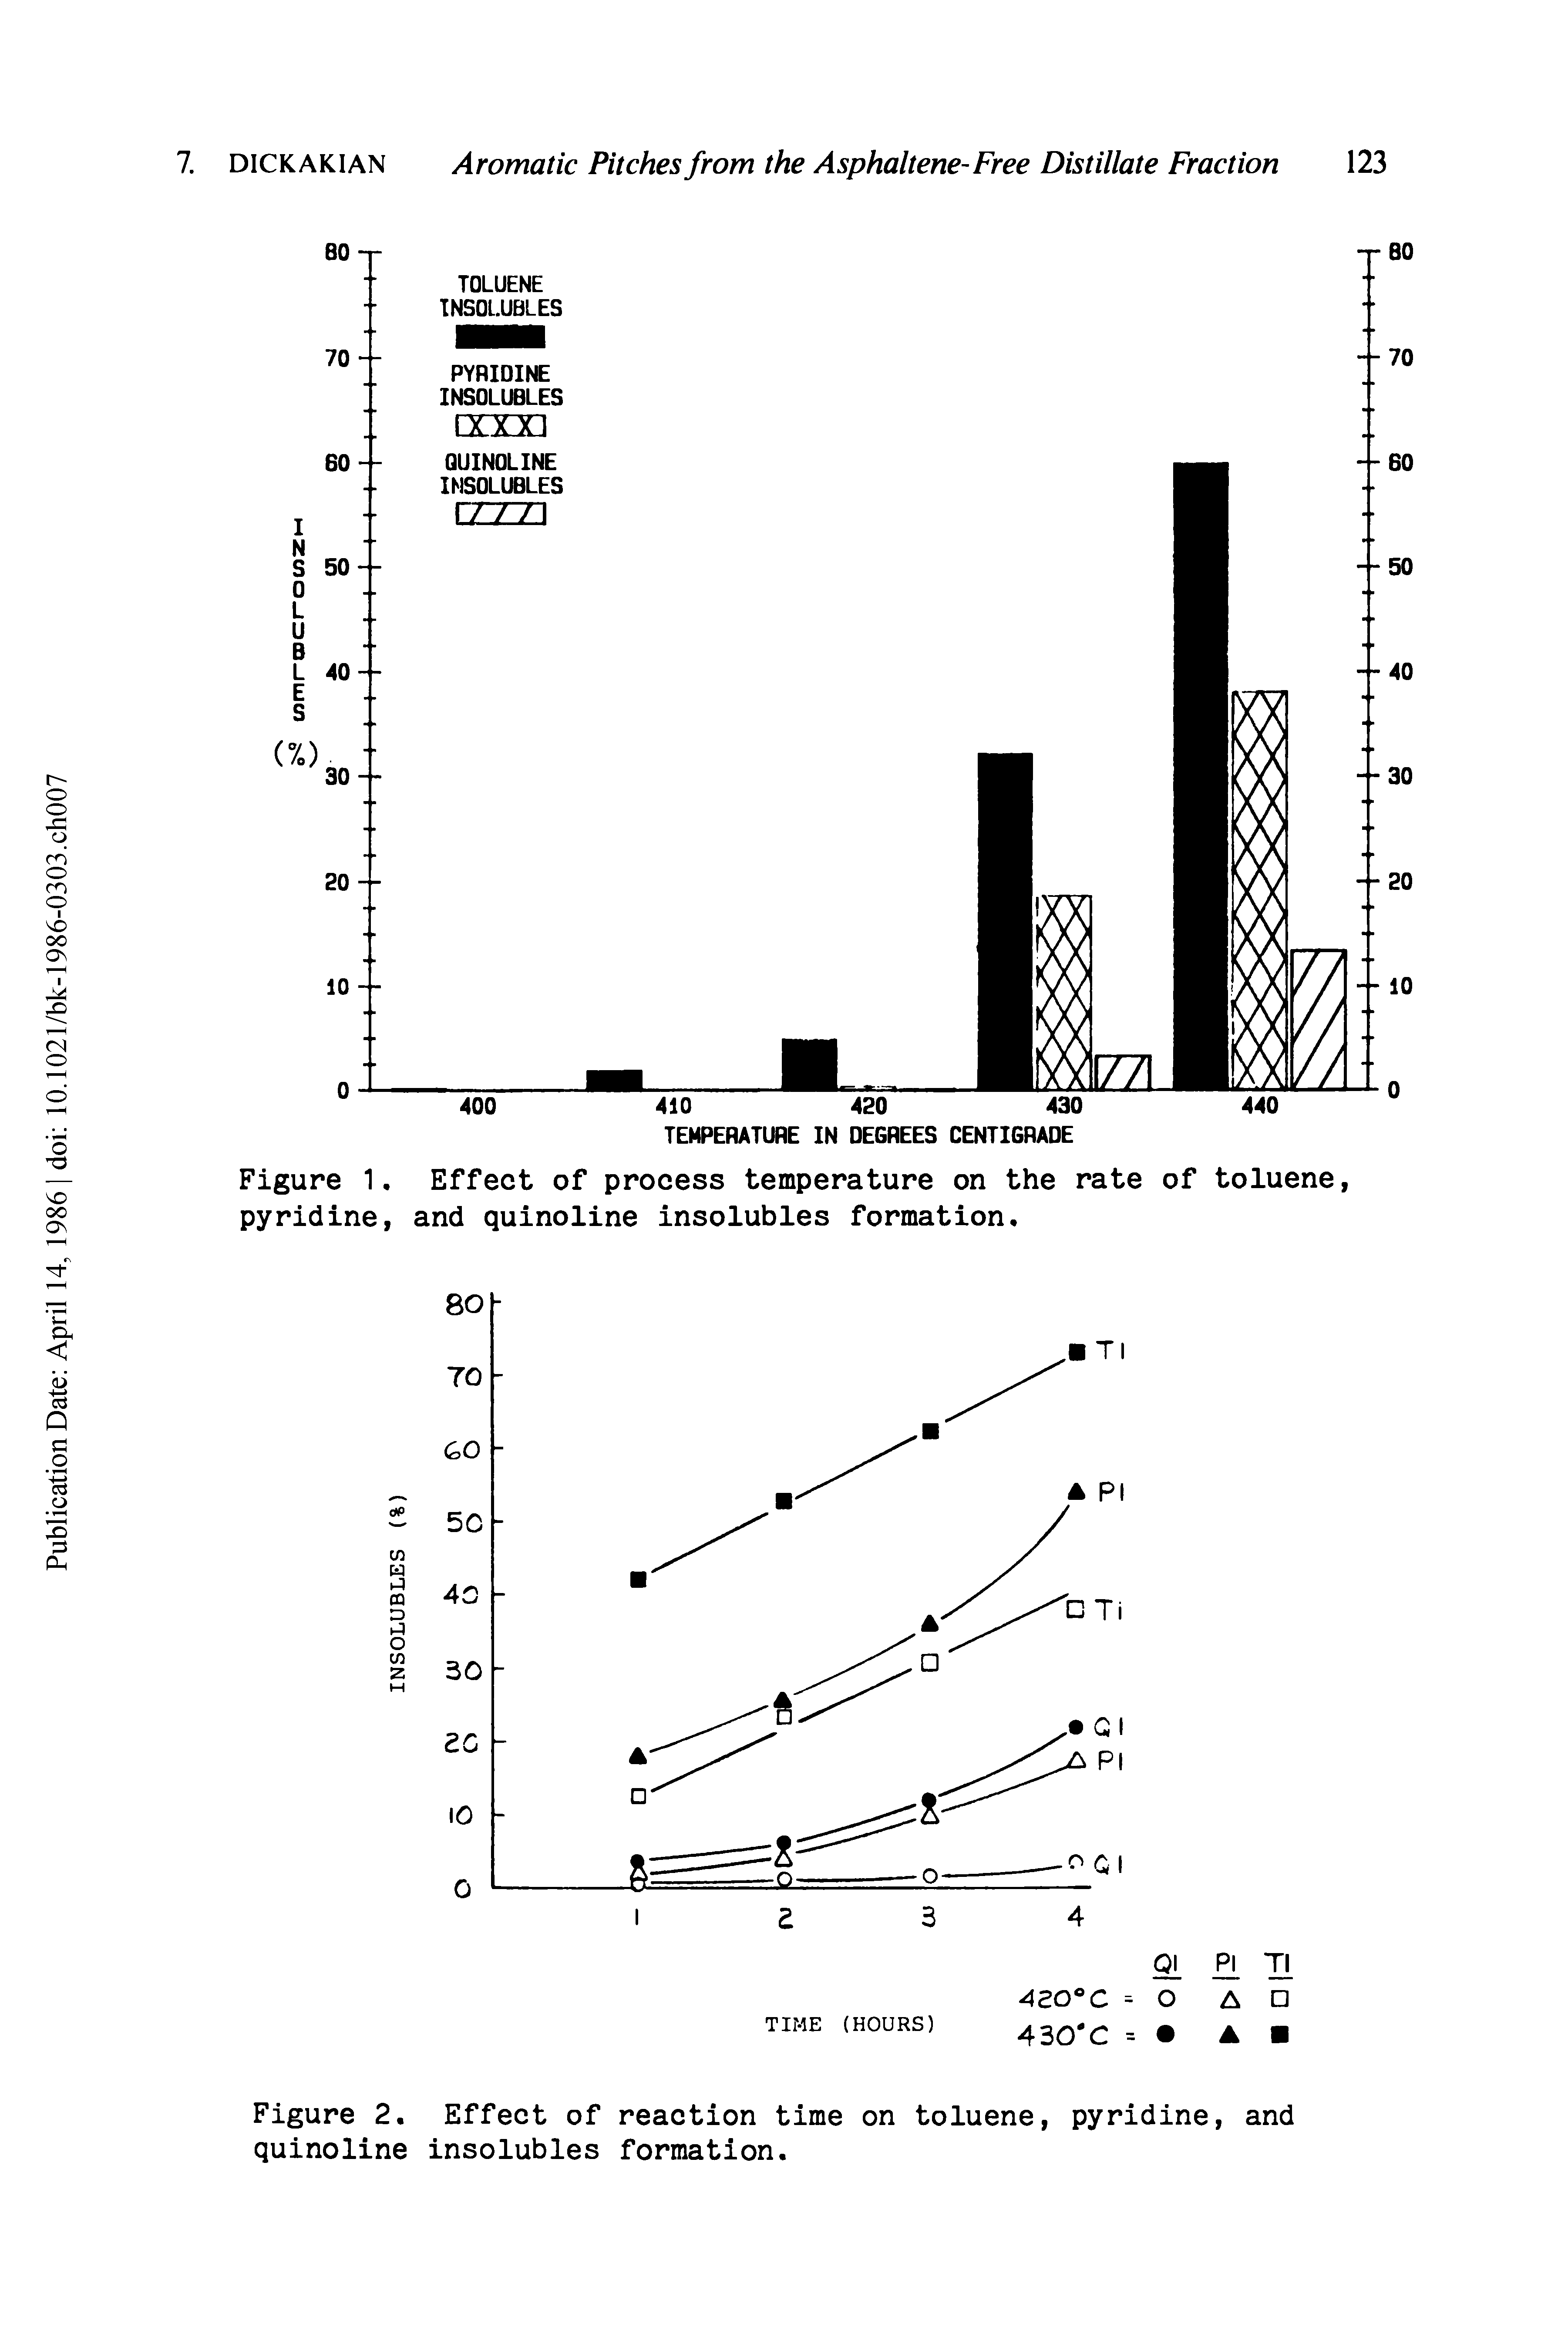 Figure 1. Effect of process temperature on the rate of toluene, pyridine, and quinoline insolubles formation.